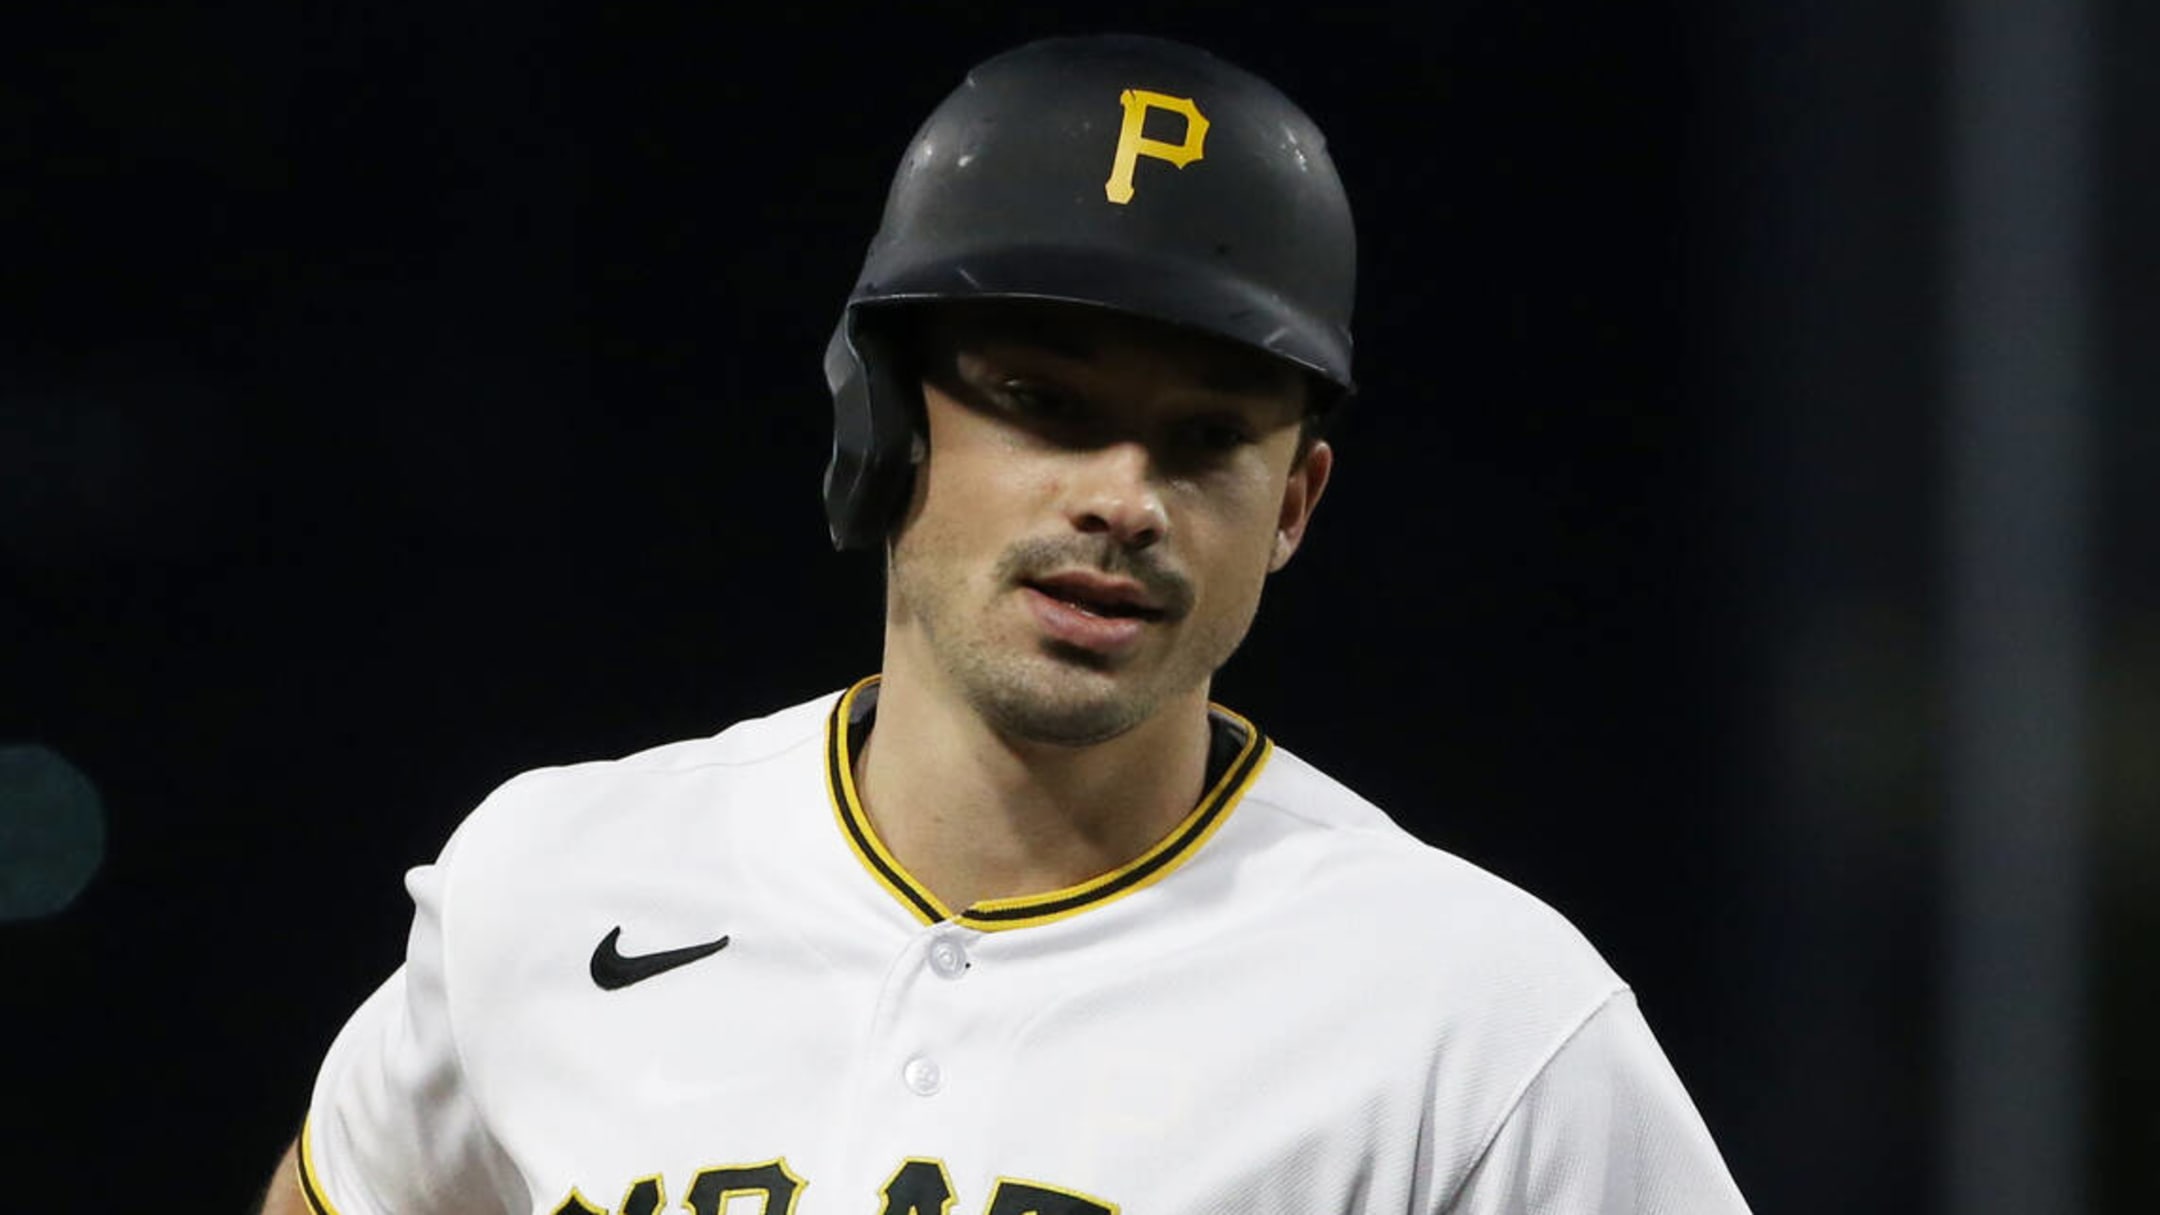 Yankees remain in contact with Pirates over potential Bryan Reynolds trade